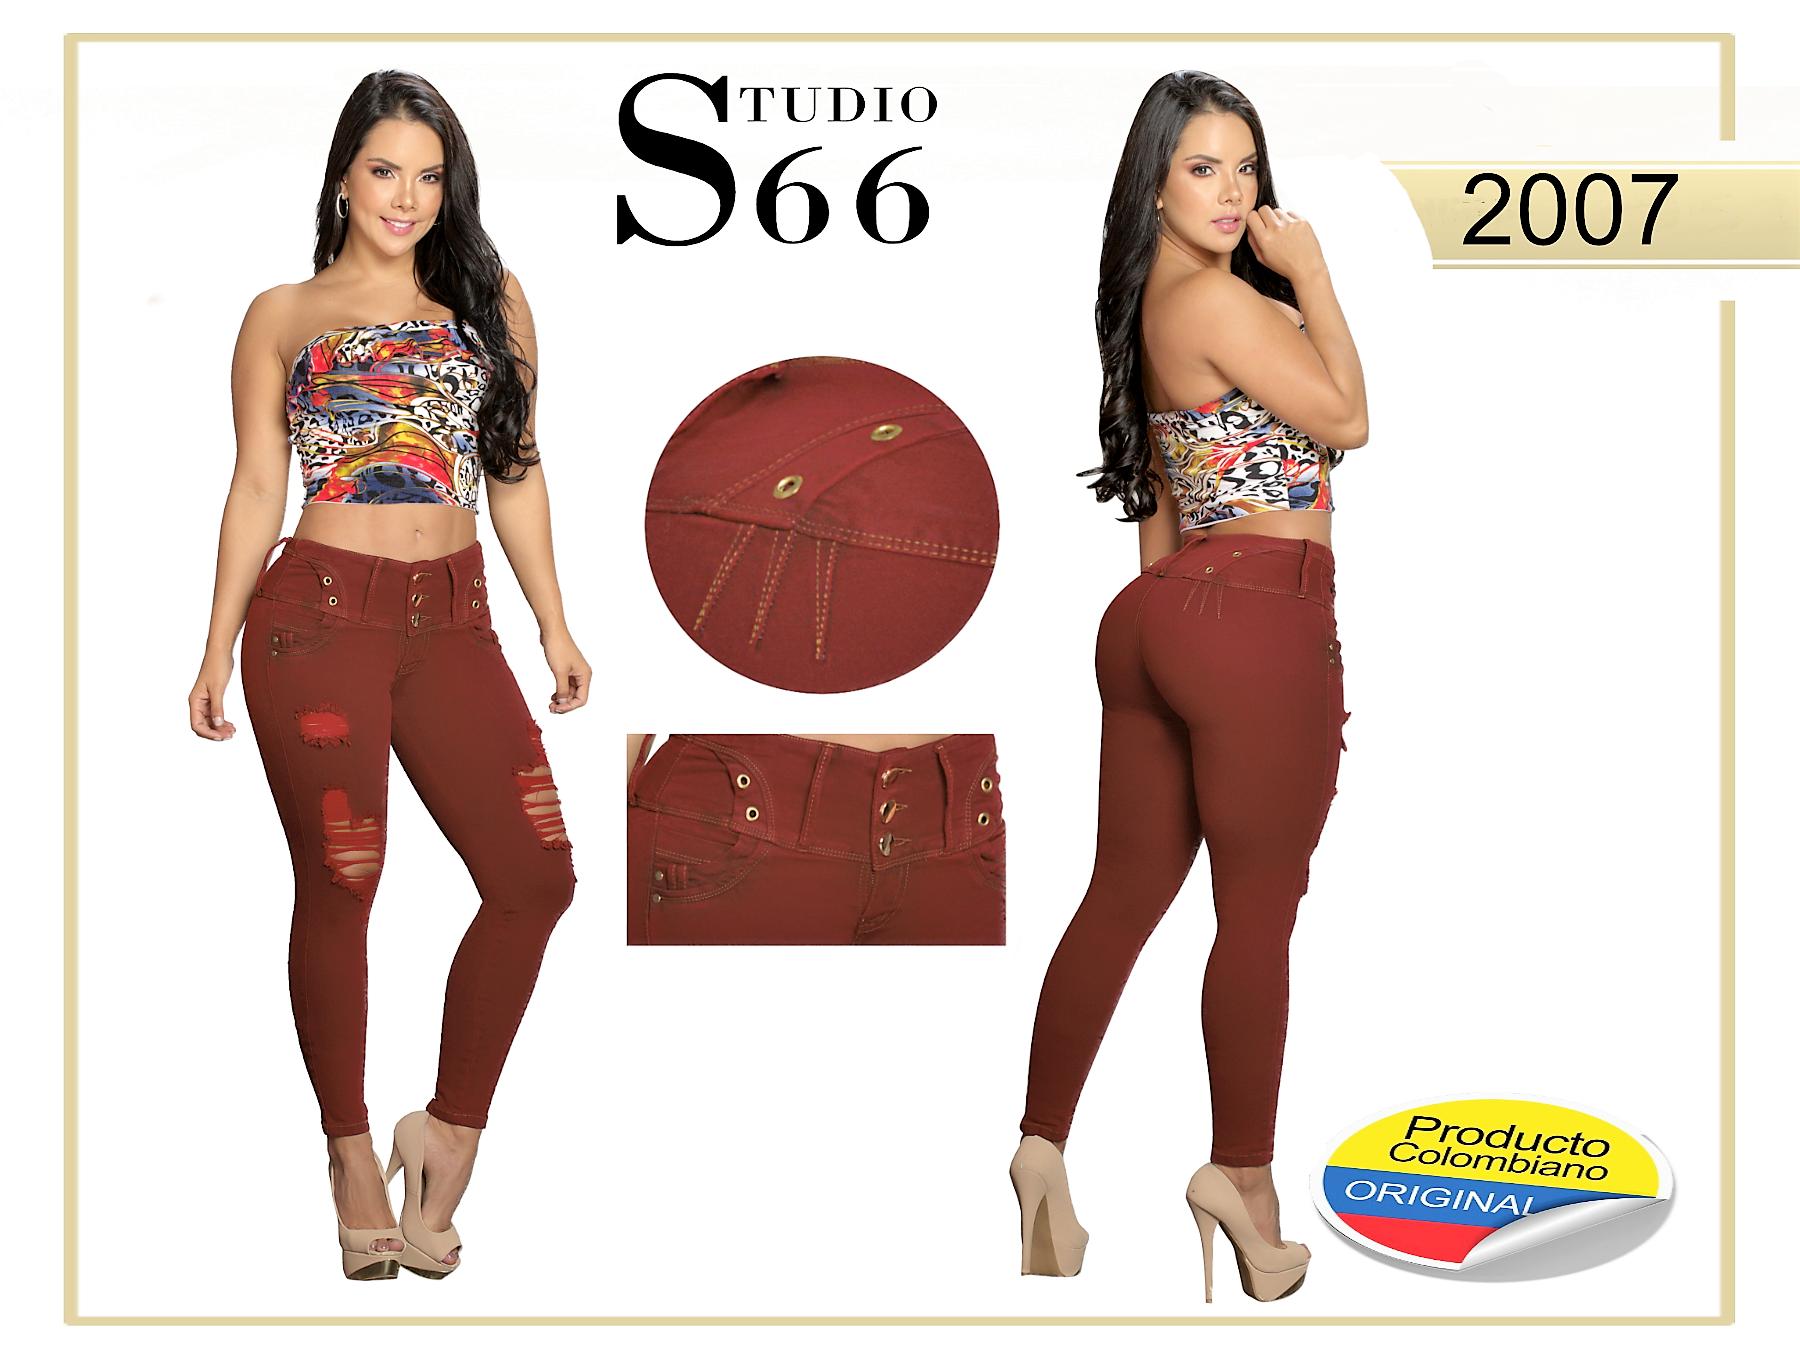 http://images.colombiaespassion.net/91587134318.jpg